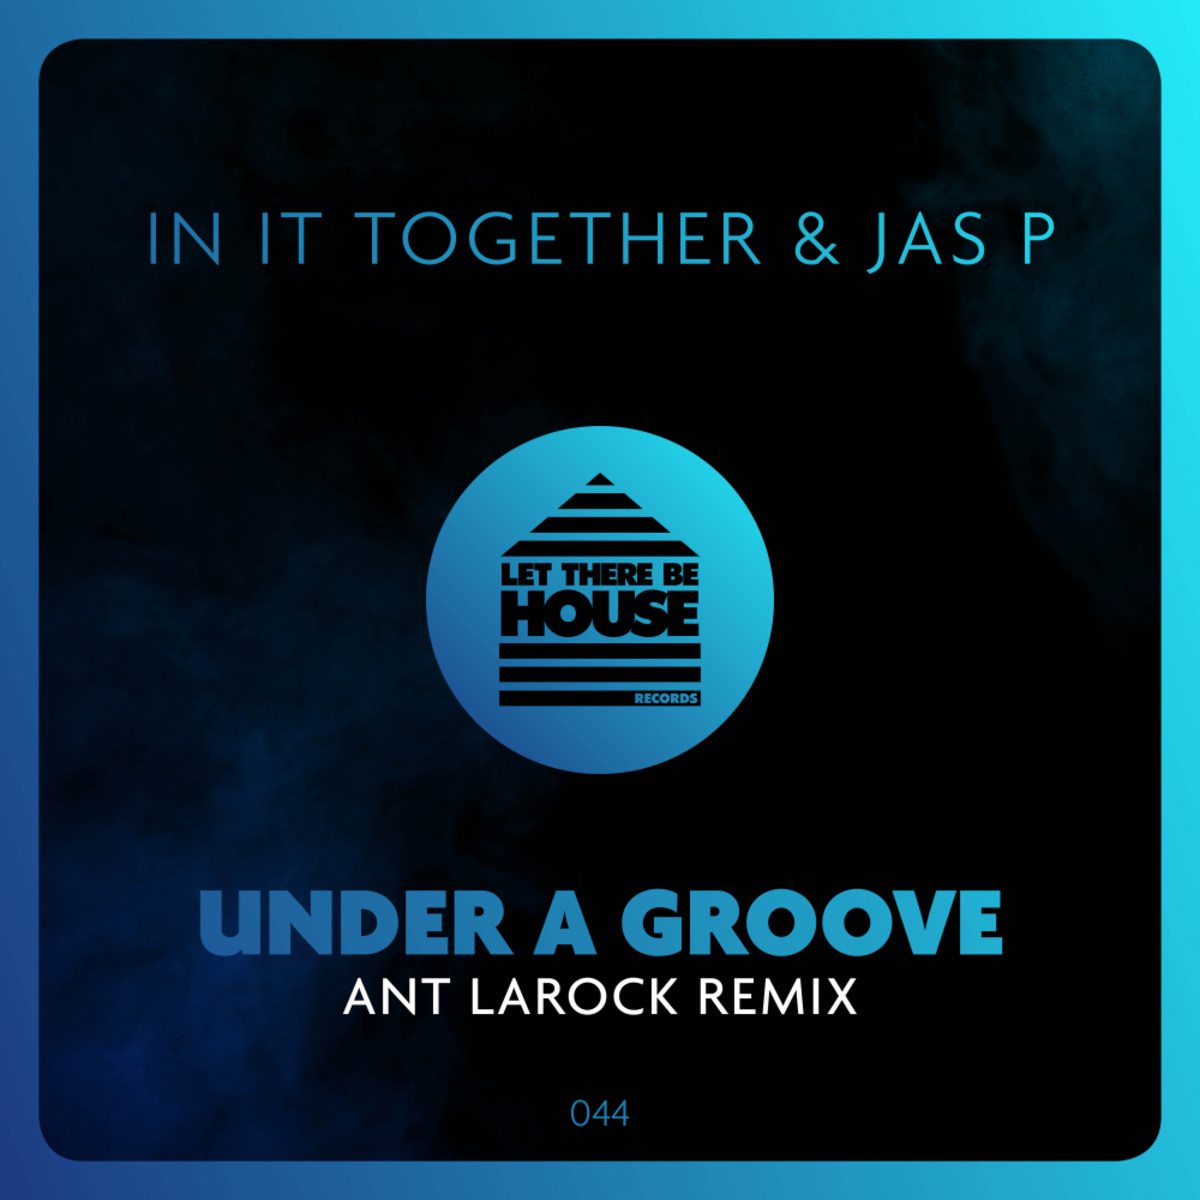 In It Together & Jas P - Under A Groove / Let There Be House Records